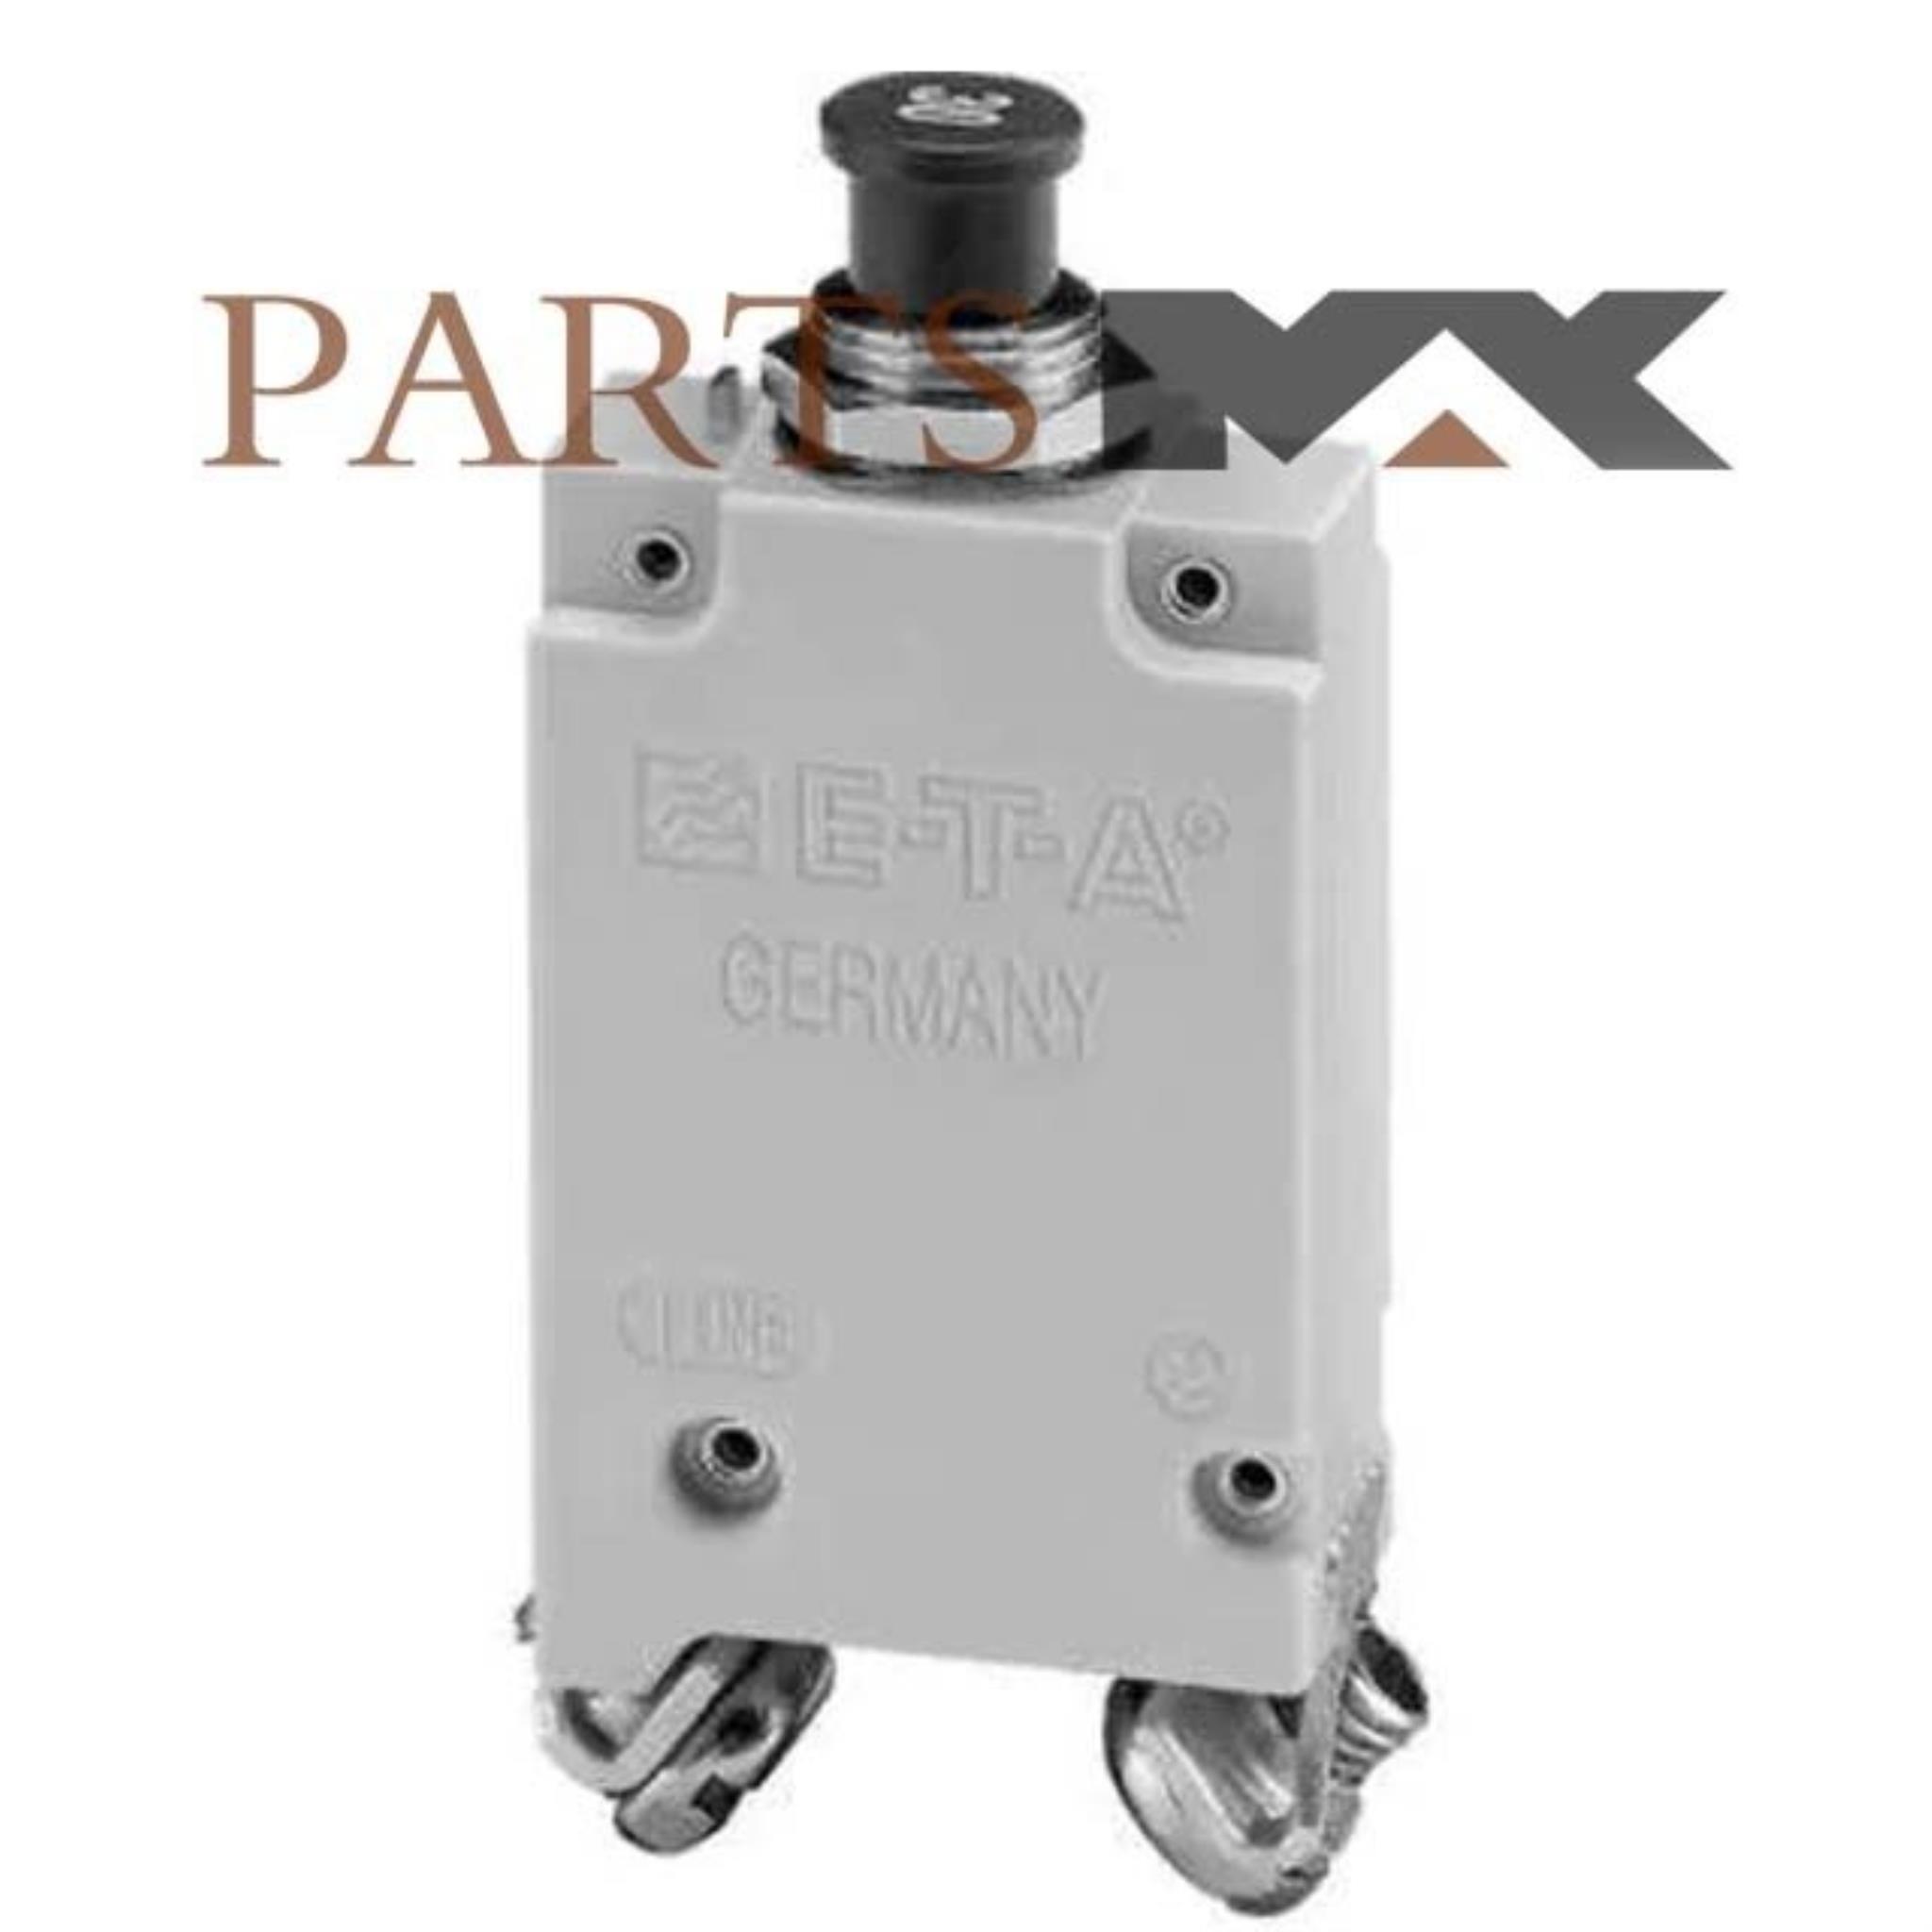 Picture of 413-K54-FN2-50A E-T-A | Partsmax Türkiye